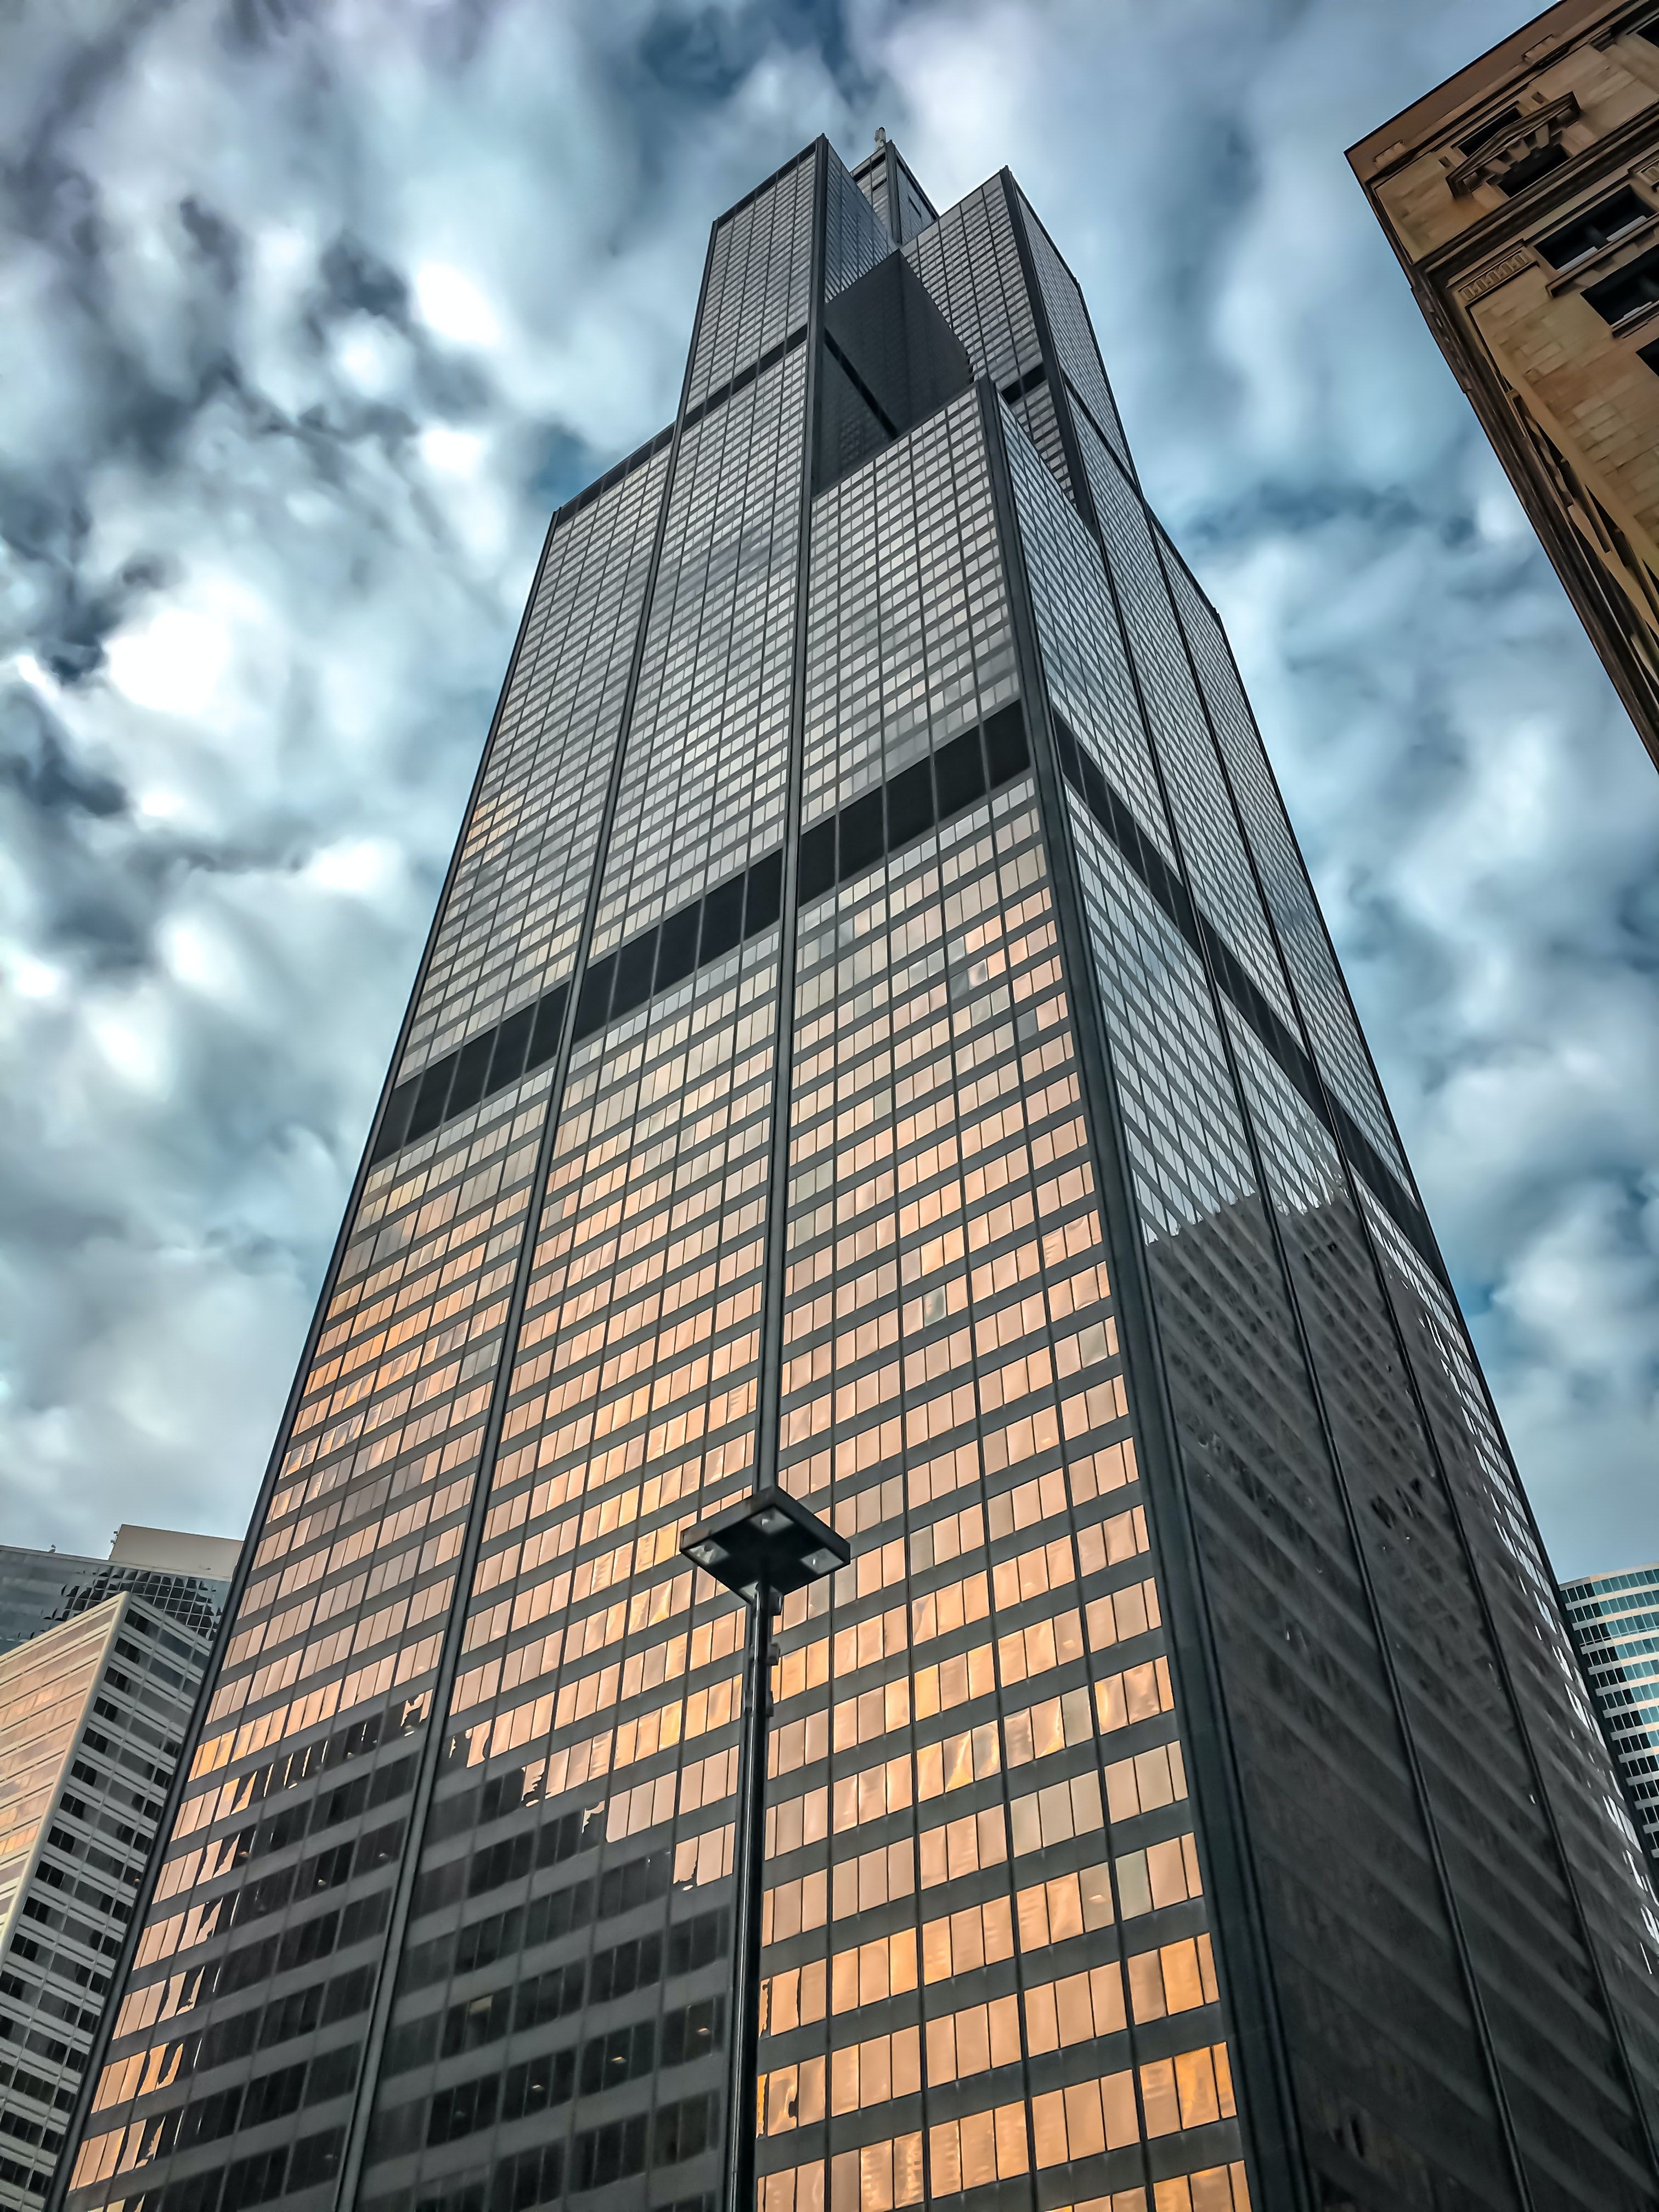 Low Angle Shot of Willis Tower Under Cloudy Sky · Free